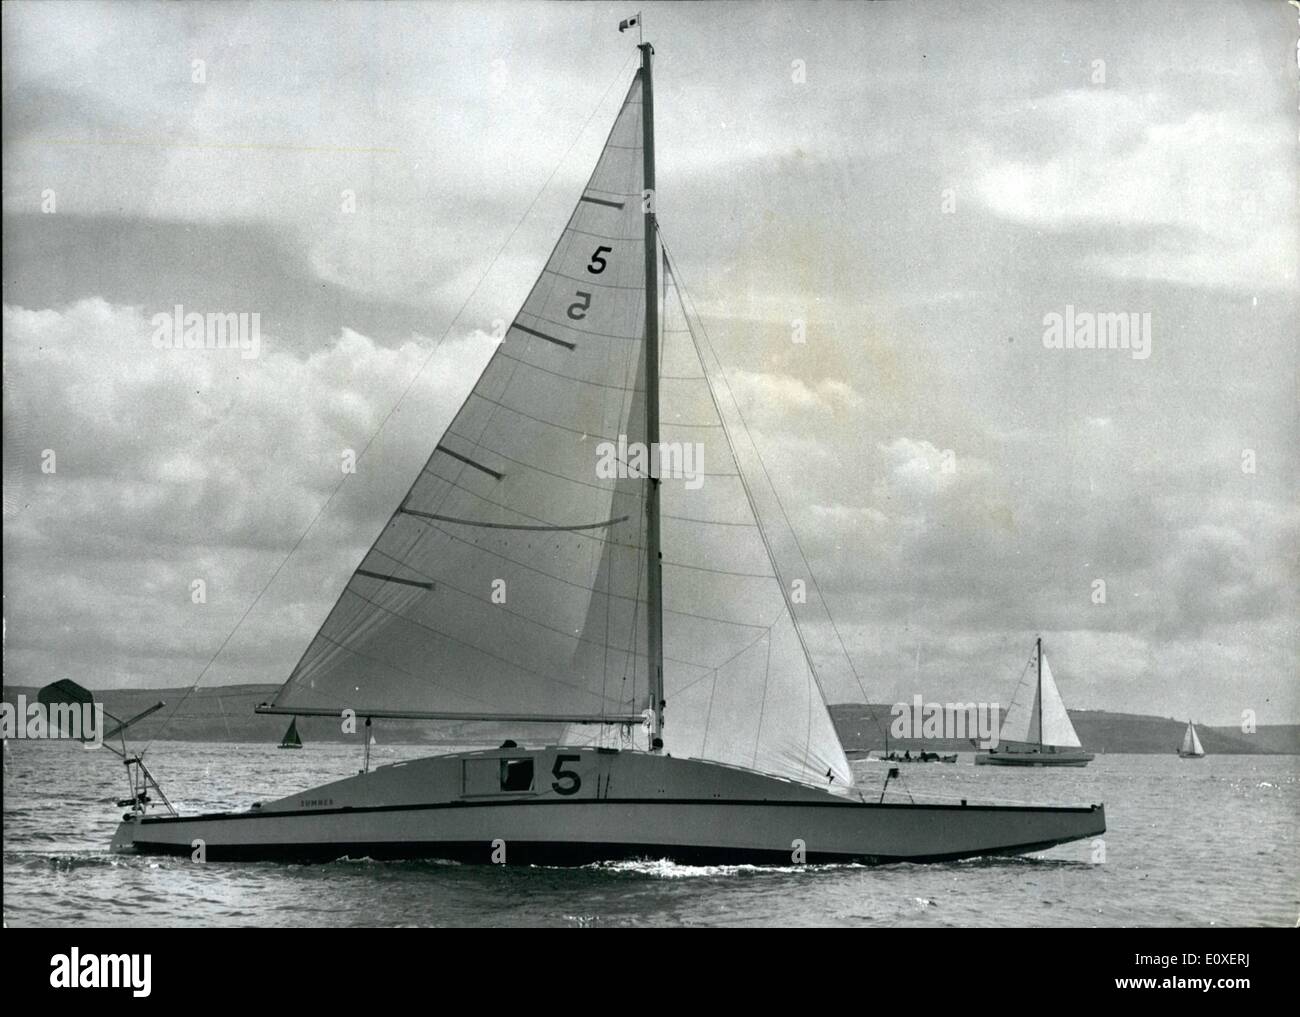 Jul. 07, 1966 - The First Two-Handed Round-Britain Sailing Race Set off From Plymouth: Out from Plymouth sailed 16 vessels bound on a 2,000-mile trip around Britain. They set off in the first two-handed Round-Britain Sailing Race for a trophy and a prize of &pound;1,000. Some of the boats have been specially designed for this particular race. Photo Shows: The yacht ''Sumner'' with an elongated hump on the desk is being sailed in the race by its owner. Lieut-Col. ''Blondie'' Hasler, veteran of solo Trans-Atlantic crossings, and his wife Stock Photo